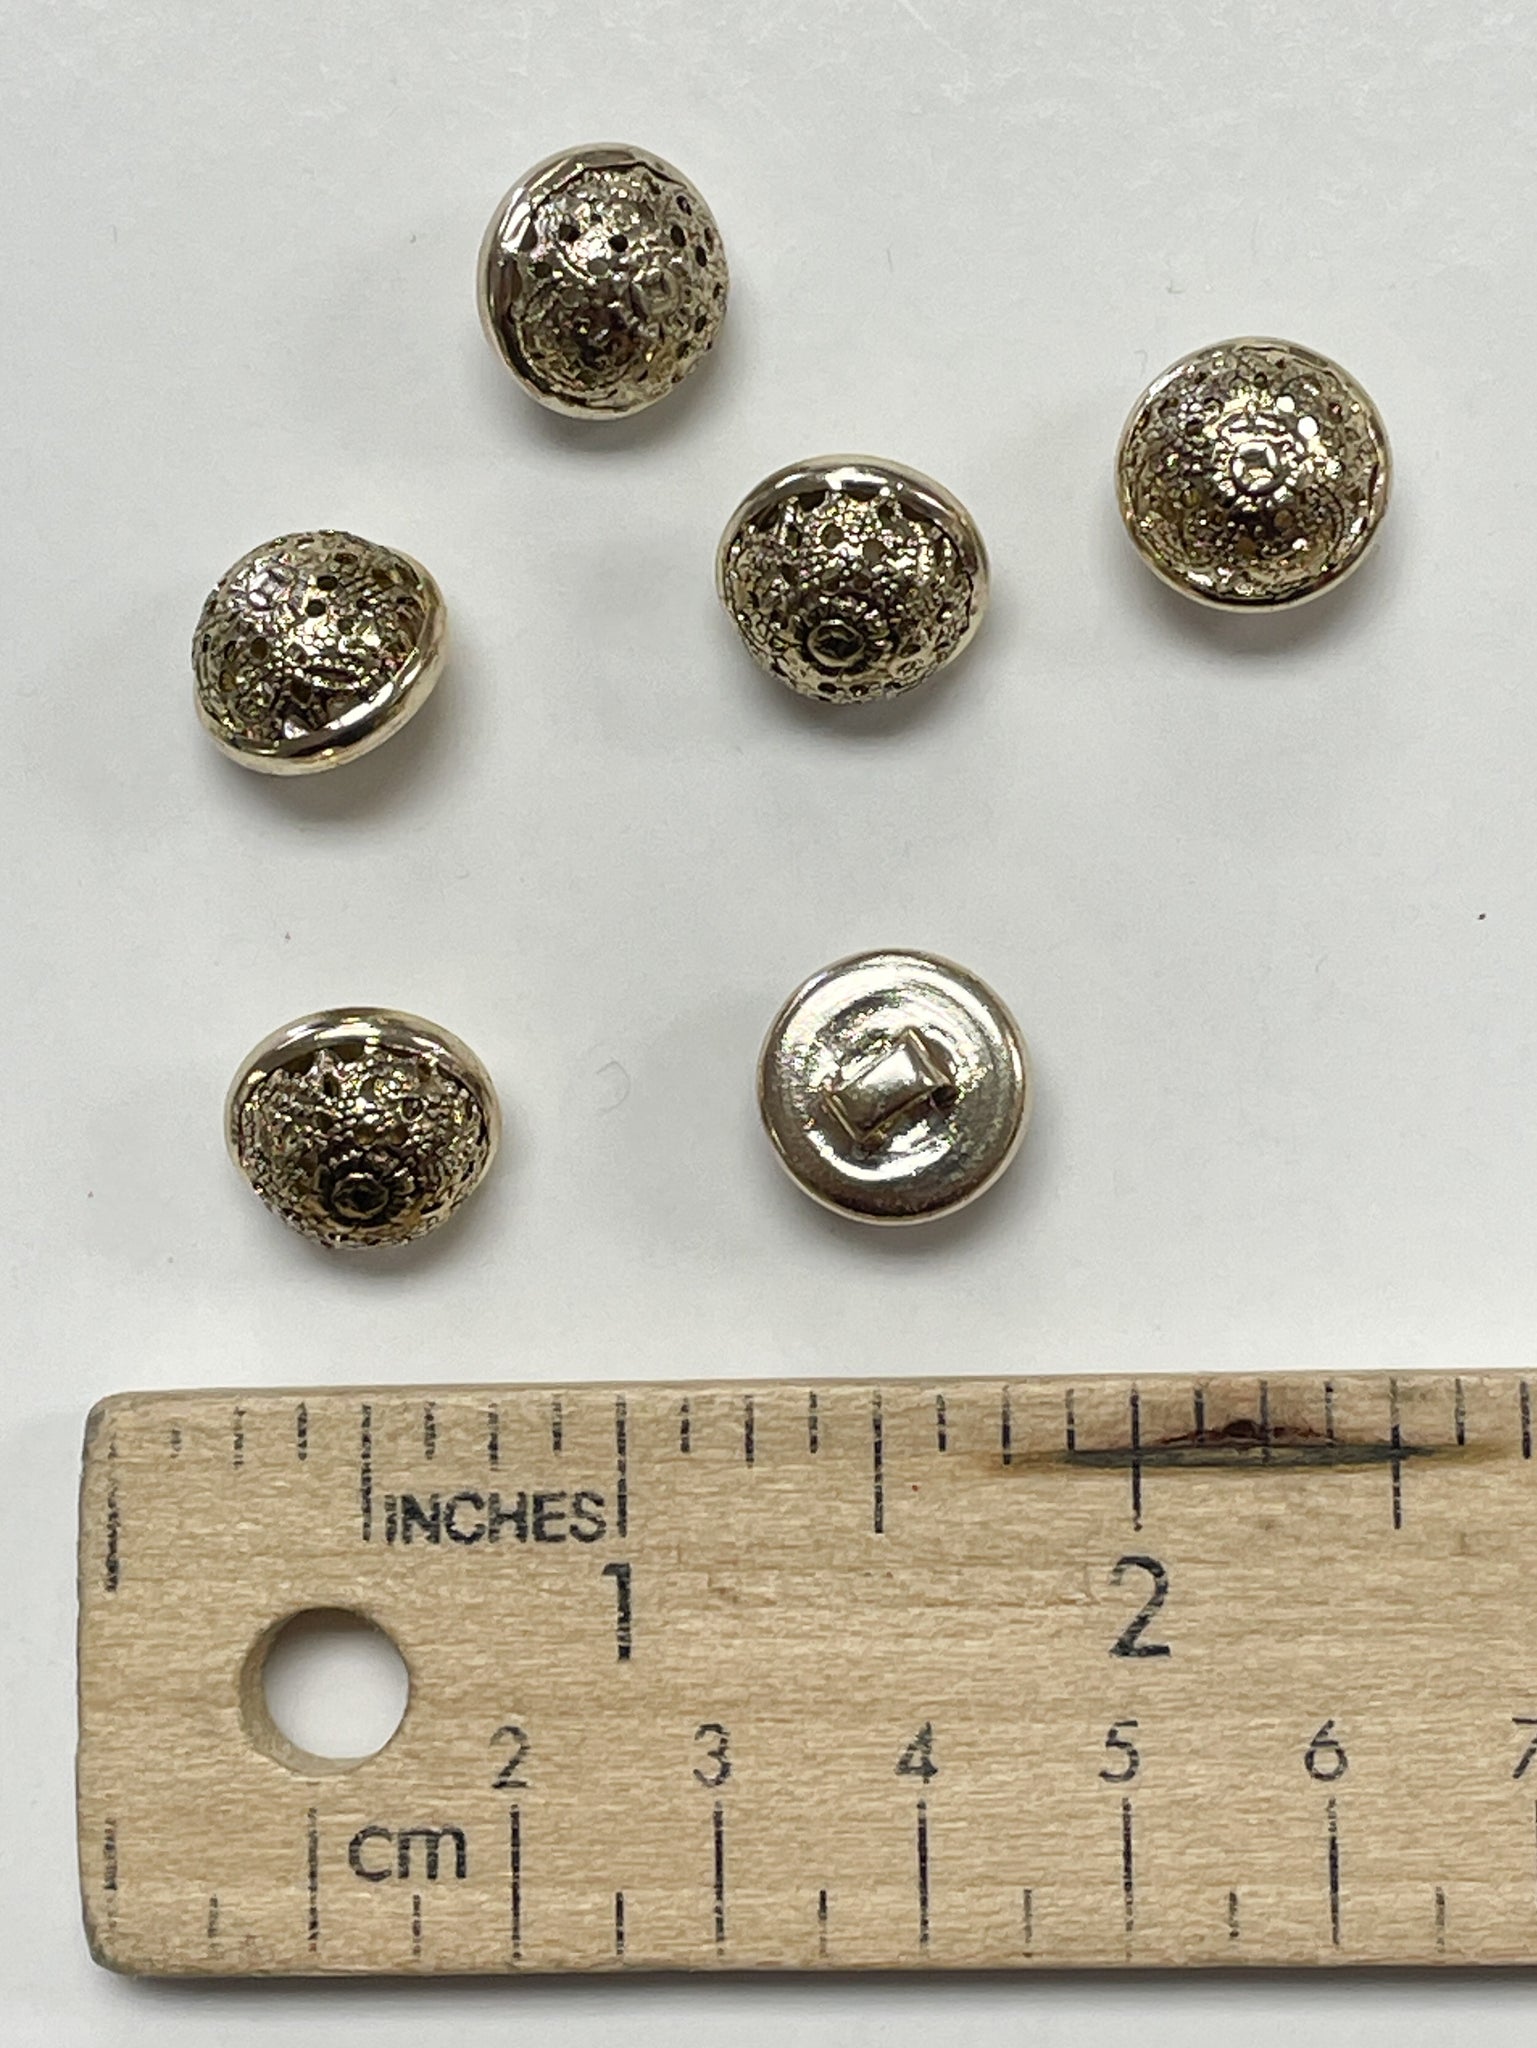 Buttons Plastic Set of 5 or 6 - Gold Filigree